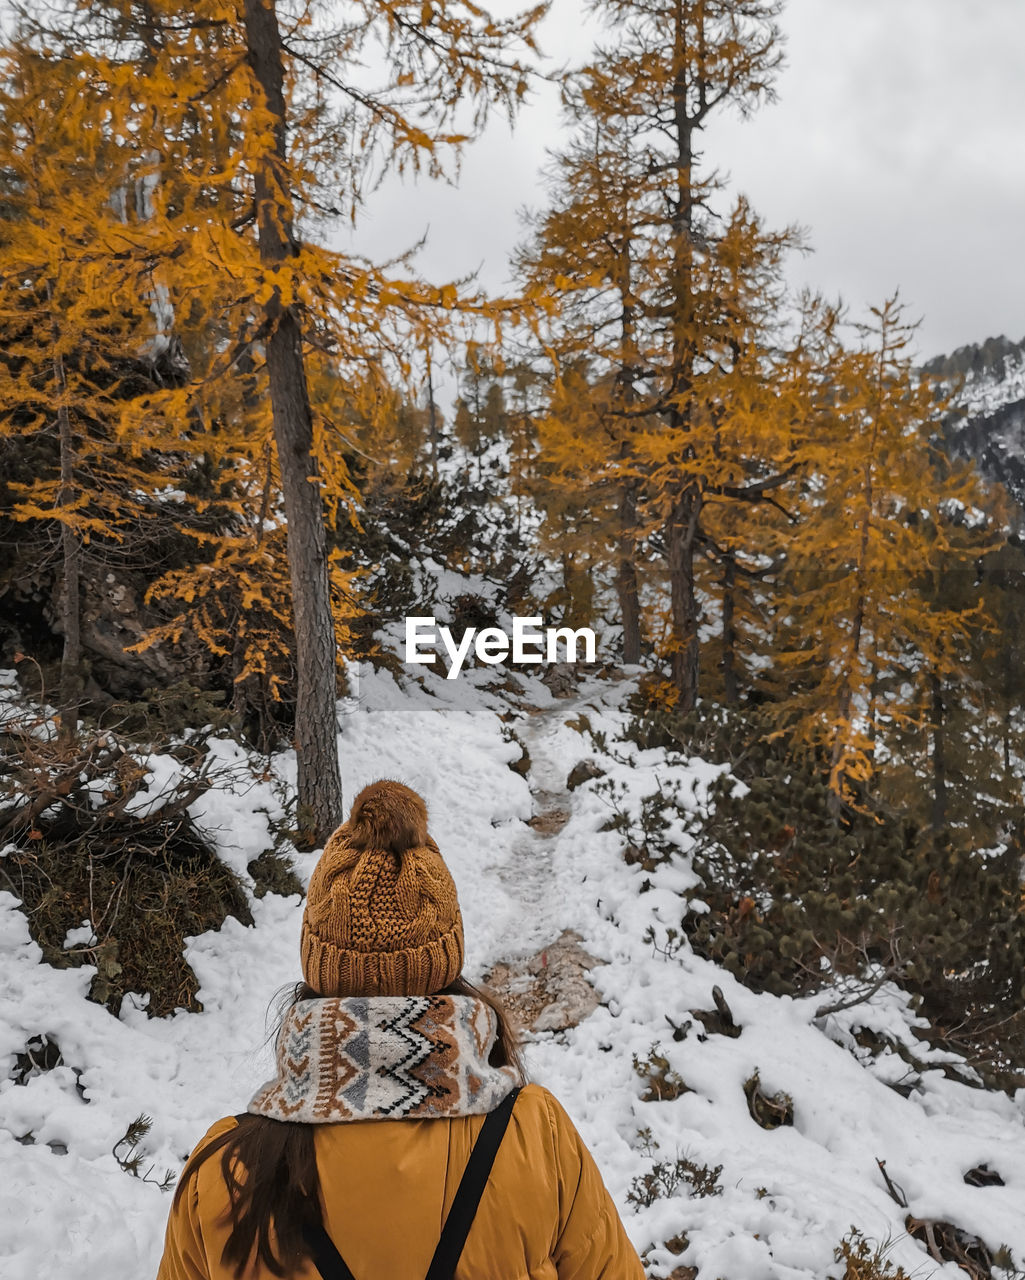 winter, snow, cold temperature, tree, nature, leisure activity, forest, warm clothing, clothing, land, plant, rear view, beauty in nature, one person, scenics - nature, wilderness, adult, pinaceae, environment, coniferous tree, mountain, pine woodland, pine tree, vacation, landscape, day, travel, holiday, autumn, trip, outdoors, lifestyles, non-urban scene, hiking, hat, tranquility, women, sky, travel destinations, tranquil scene, woodland, adventure, footwear, activity, men, deep snow, leaf, person, tourism, standing, young adult